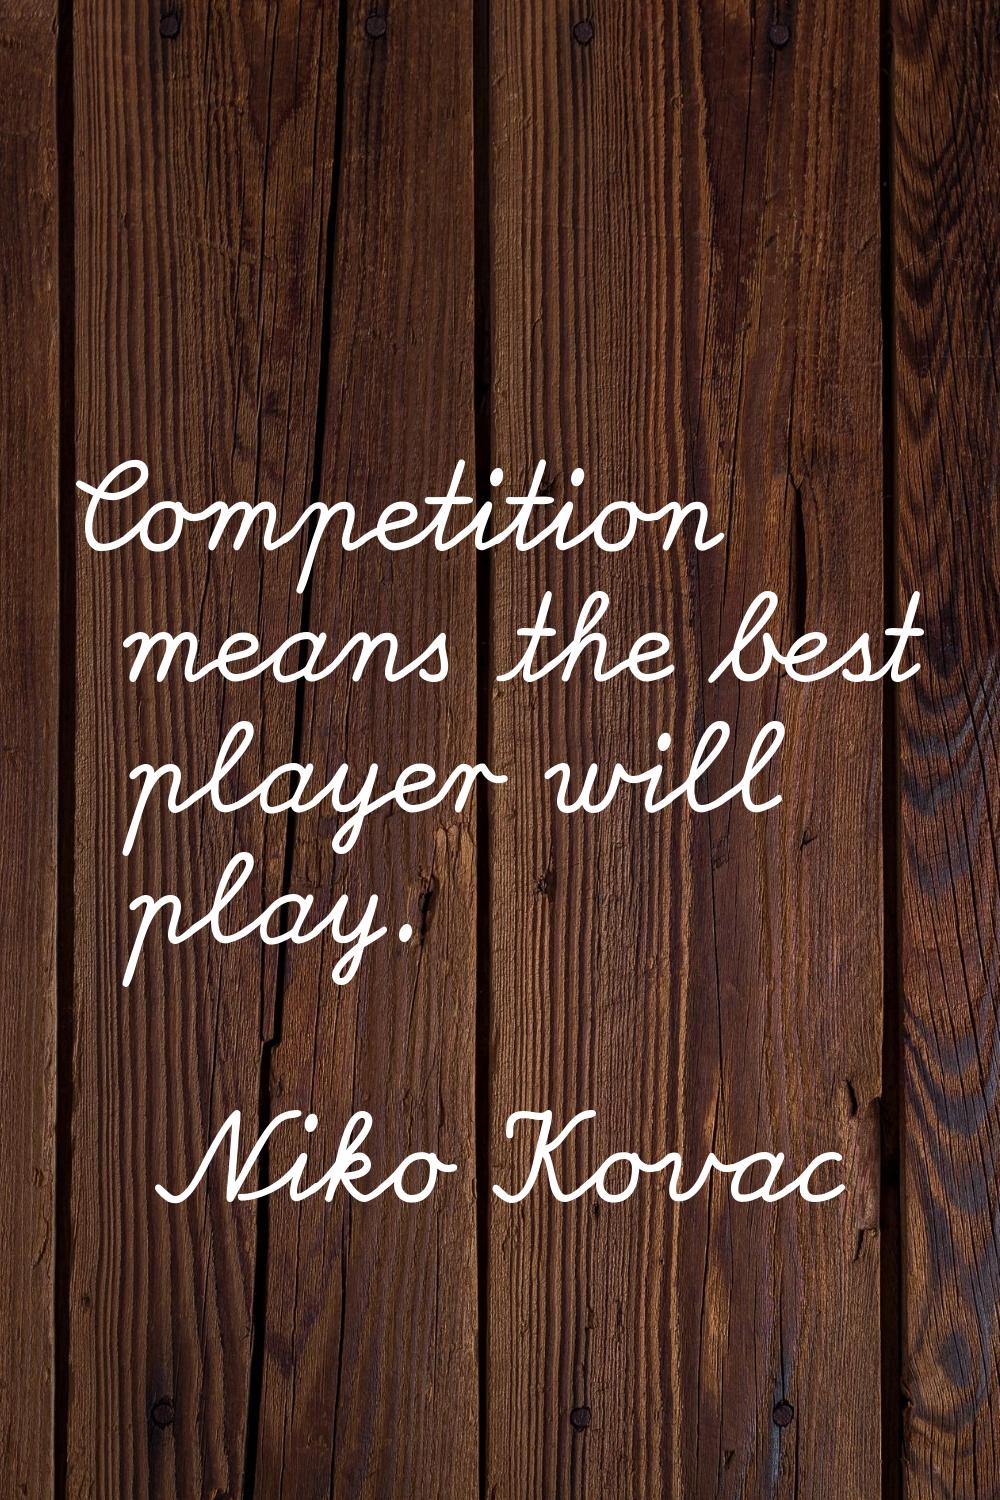 Competition means the best player will play.